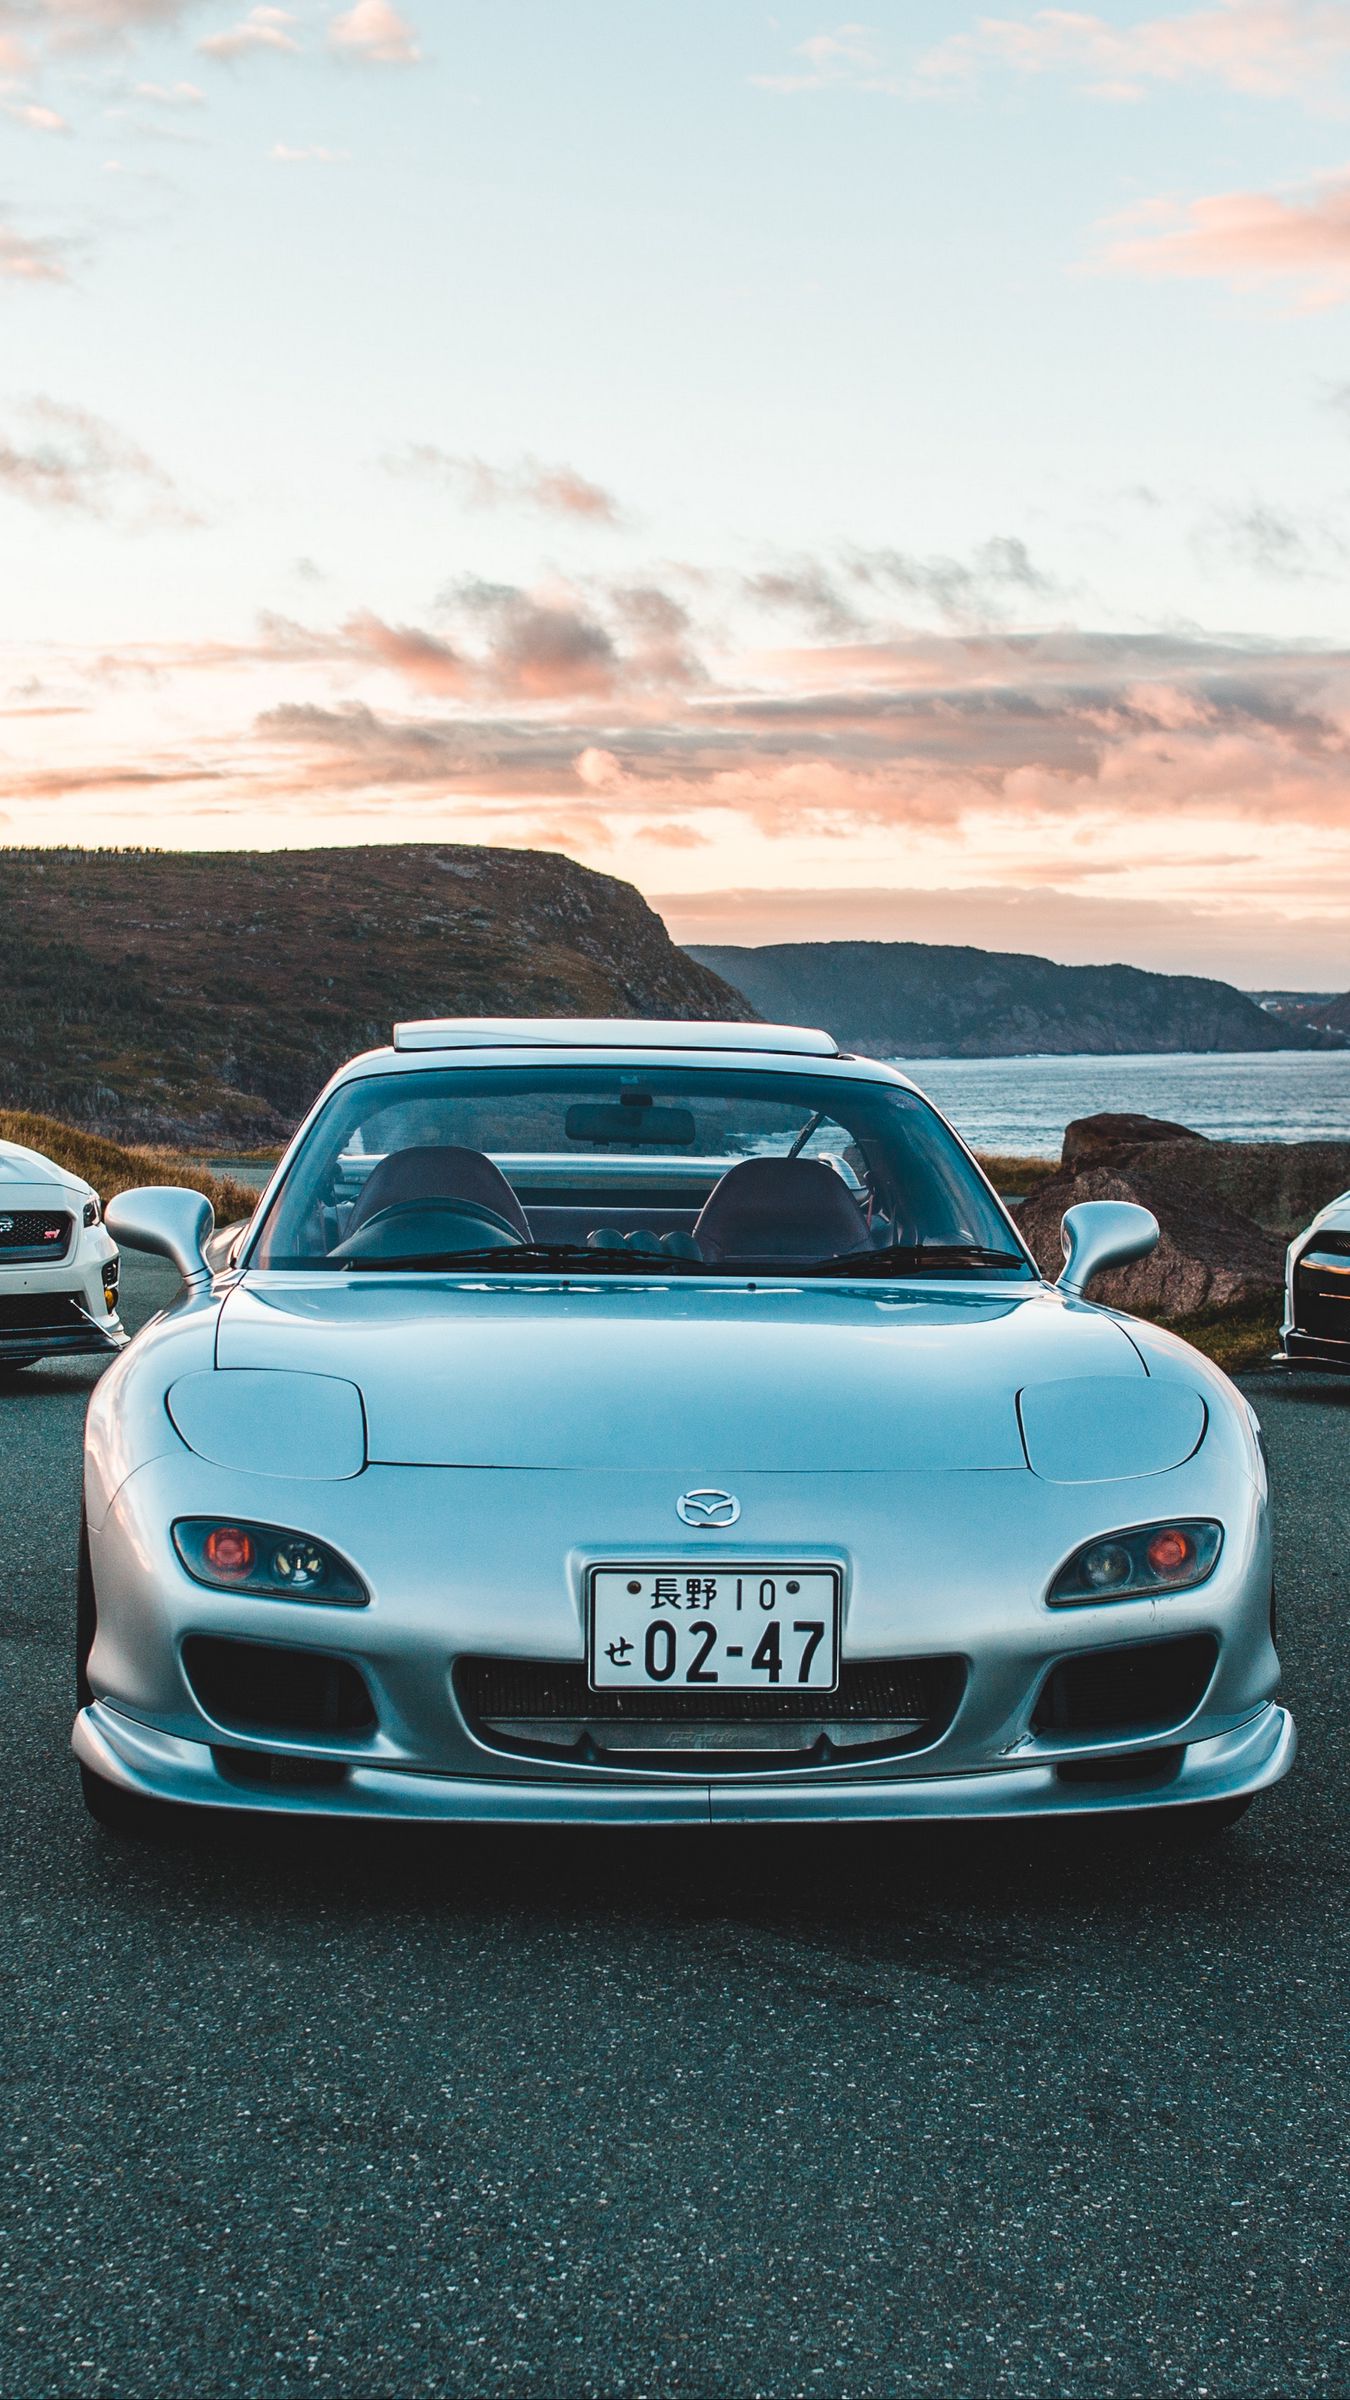 1080x1920  1080x1920 mazda rx7 mazda cars hd games for Iphone 6 7 8  wallpaper  Coolwallpapersme